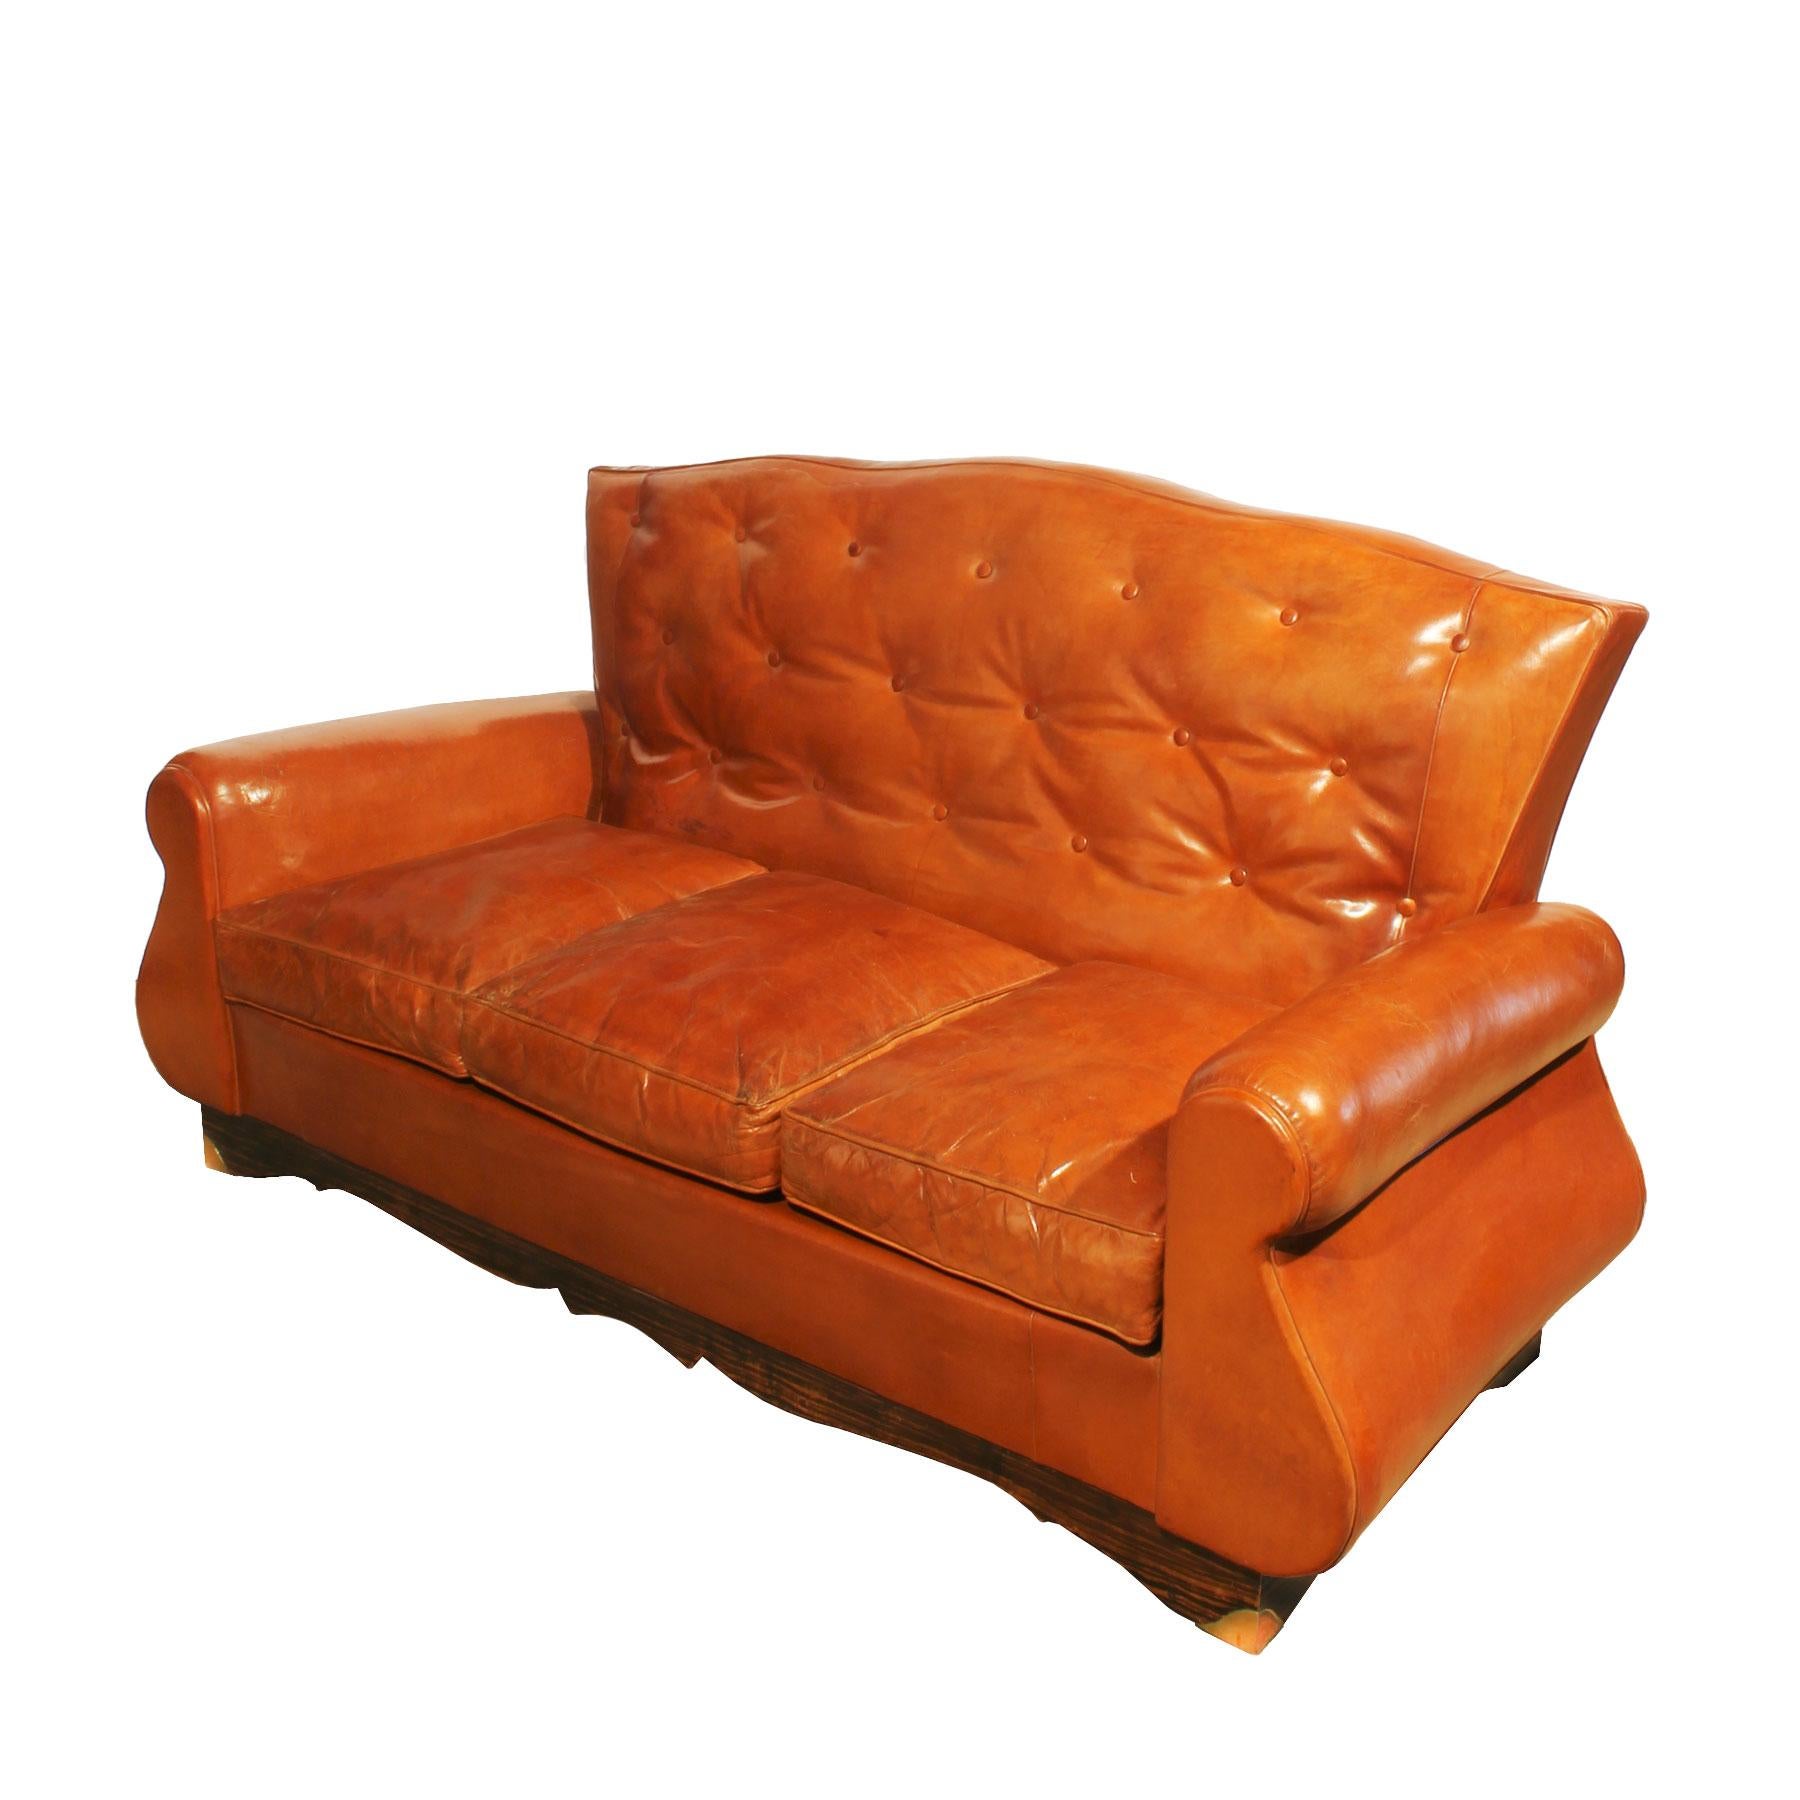 French Mid-Century Modern Chesterfield Style Couch, Original Upholstery - France For Sale